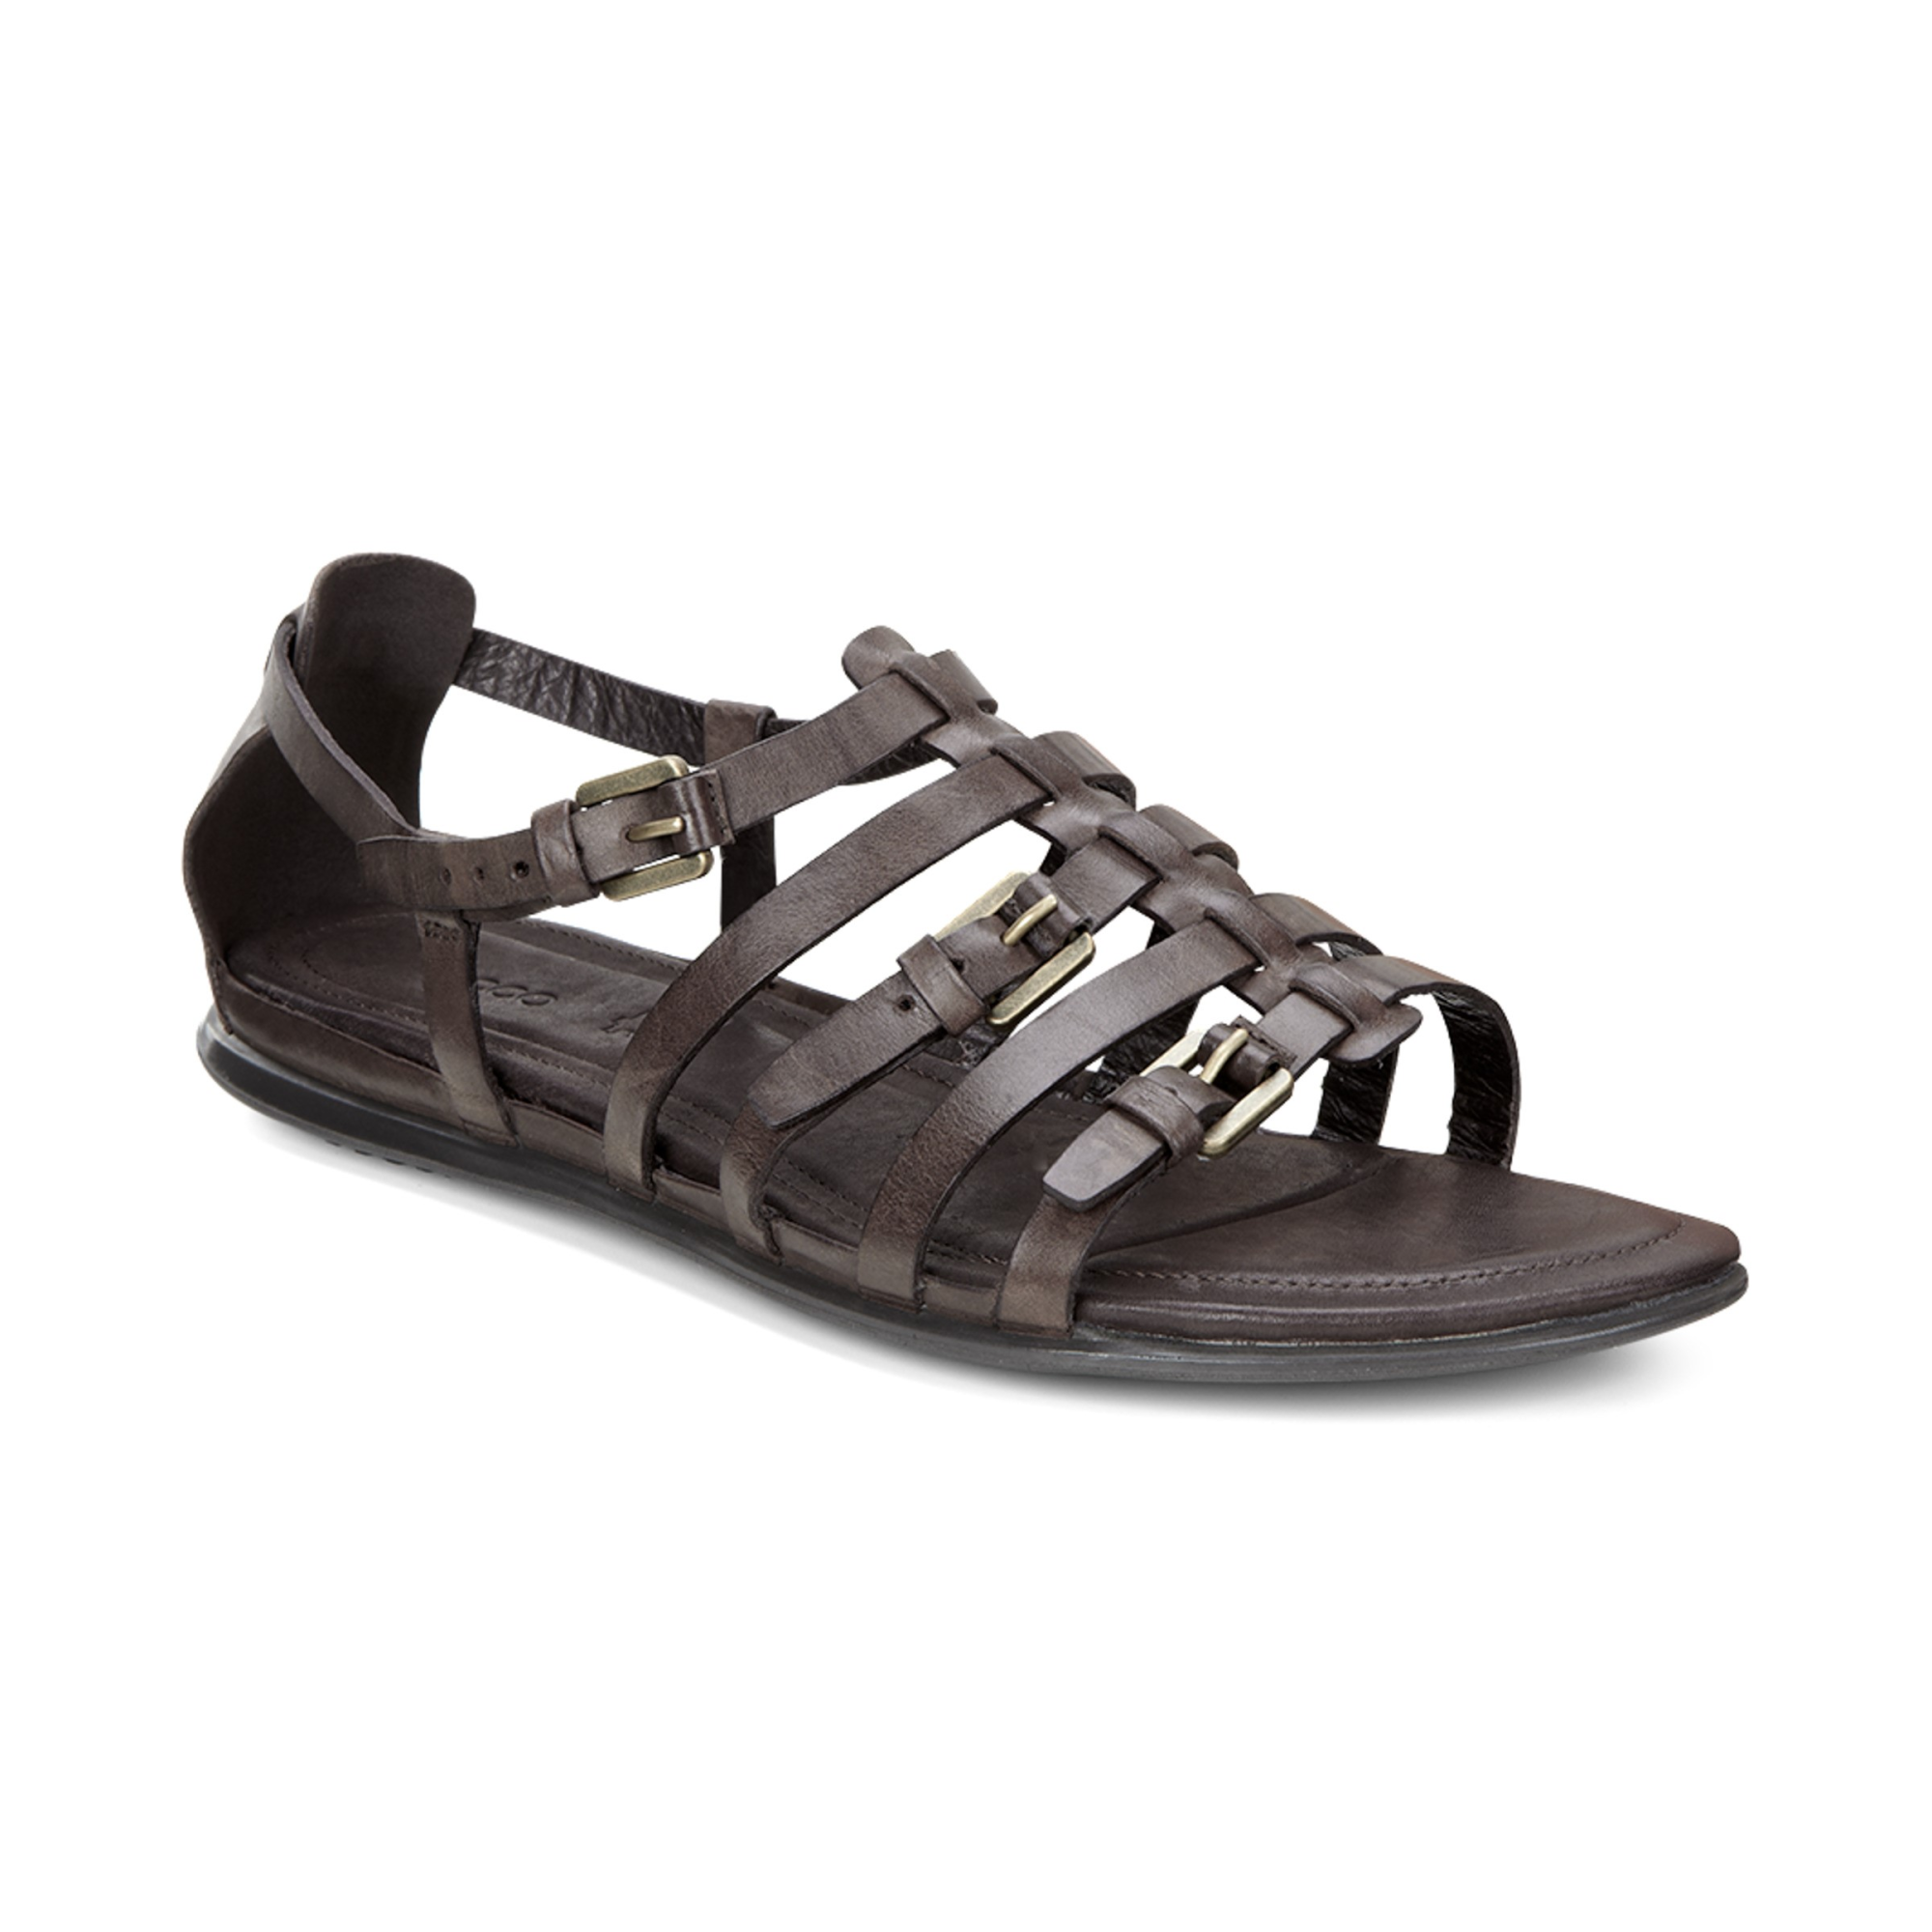 buik Zus Opnieuw schieten Ecco Touch Sandal 36 - Products - Veryk Mall - Veryk Mall, many product,  quick response, safe your money!